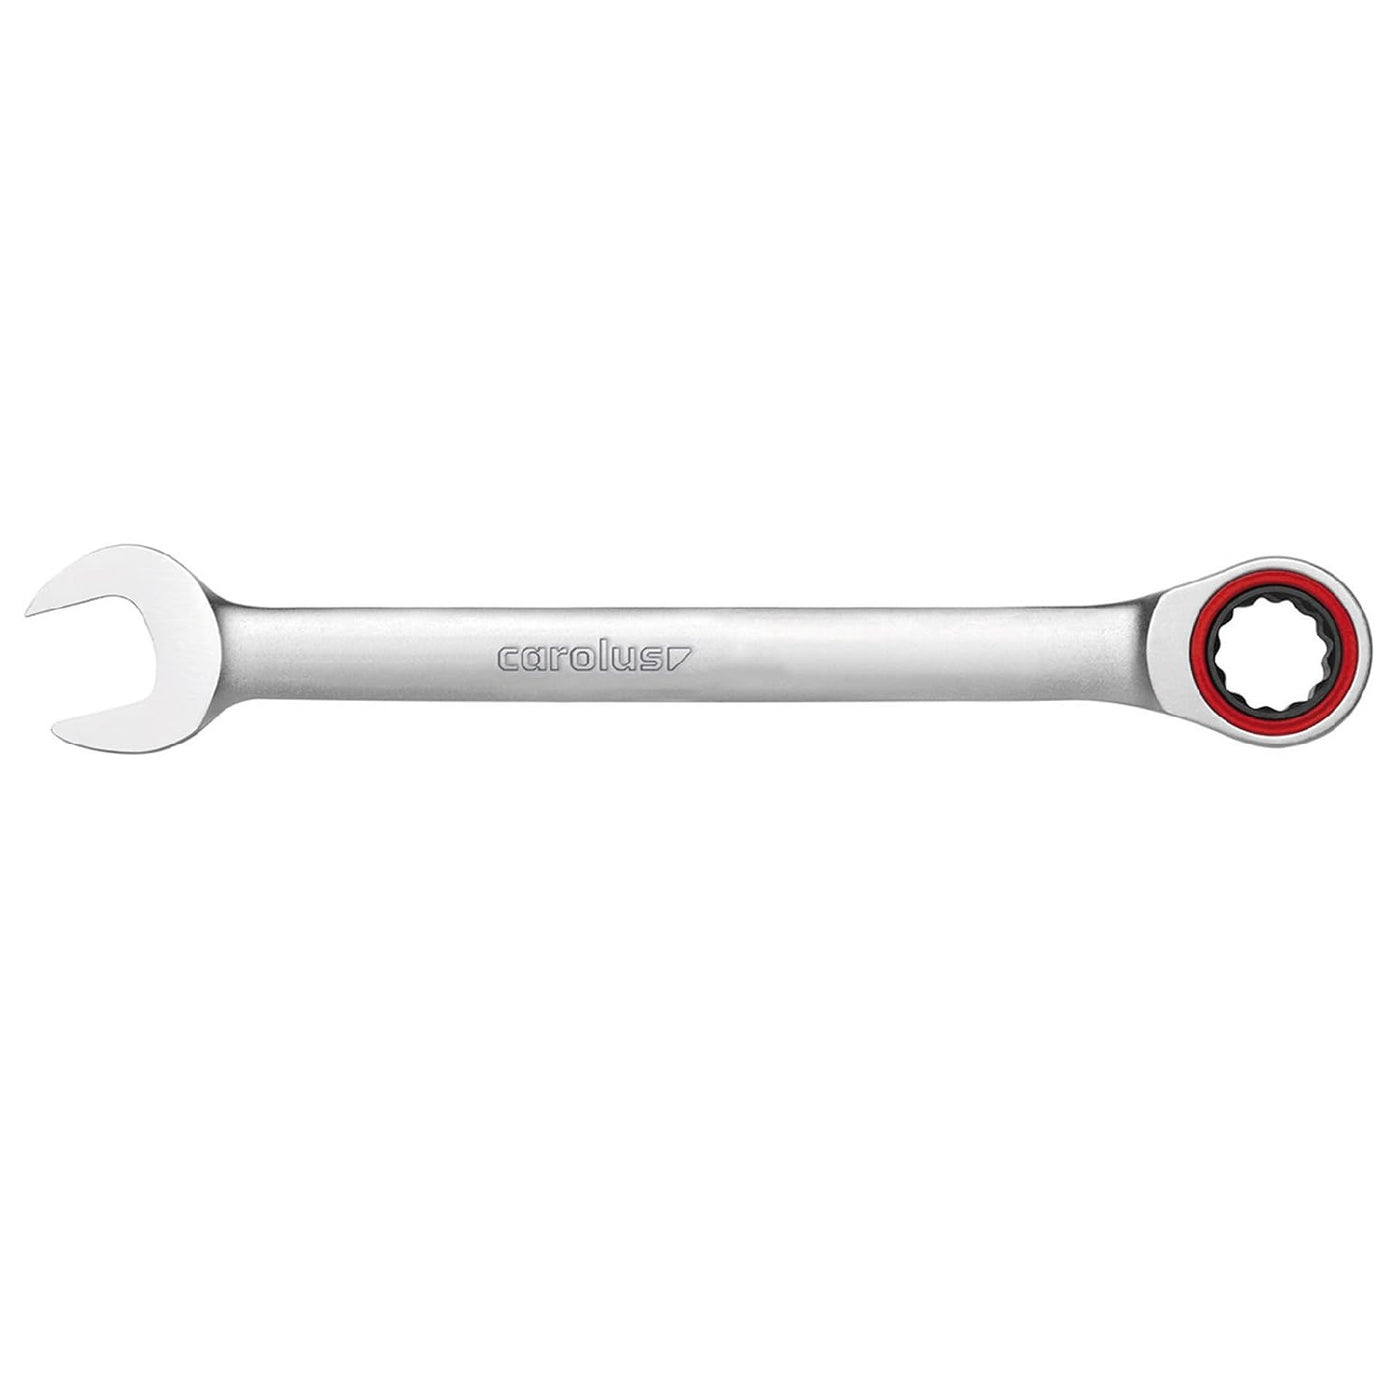 Gedore Carolus 2246813 Ratchet Wrench 17mm